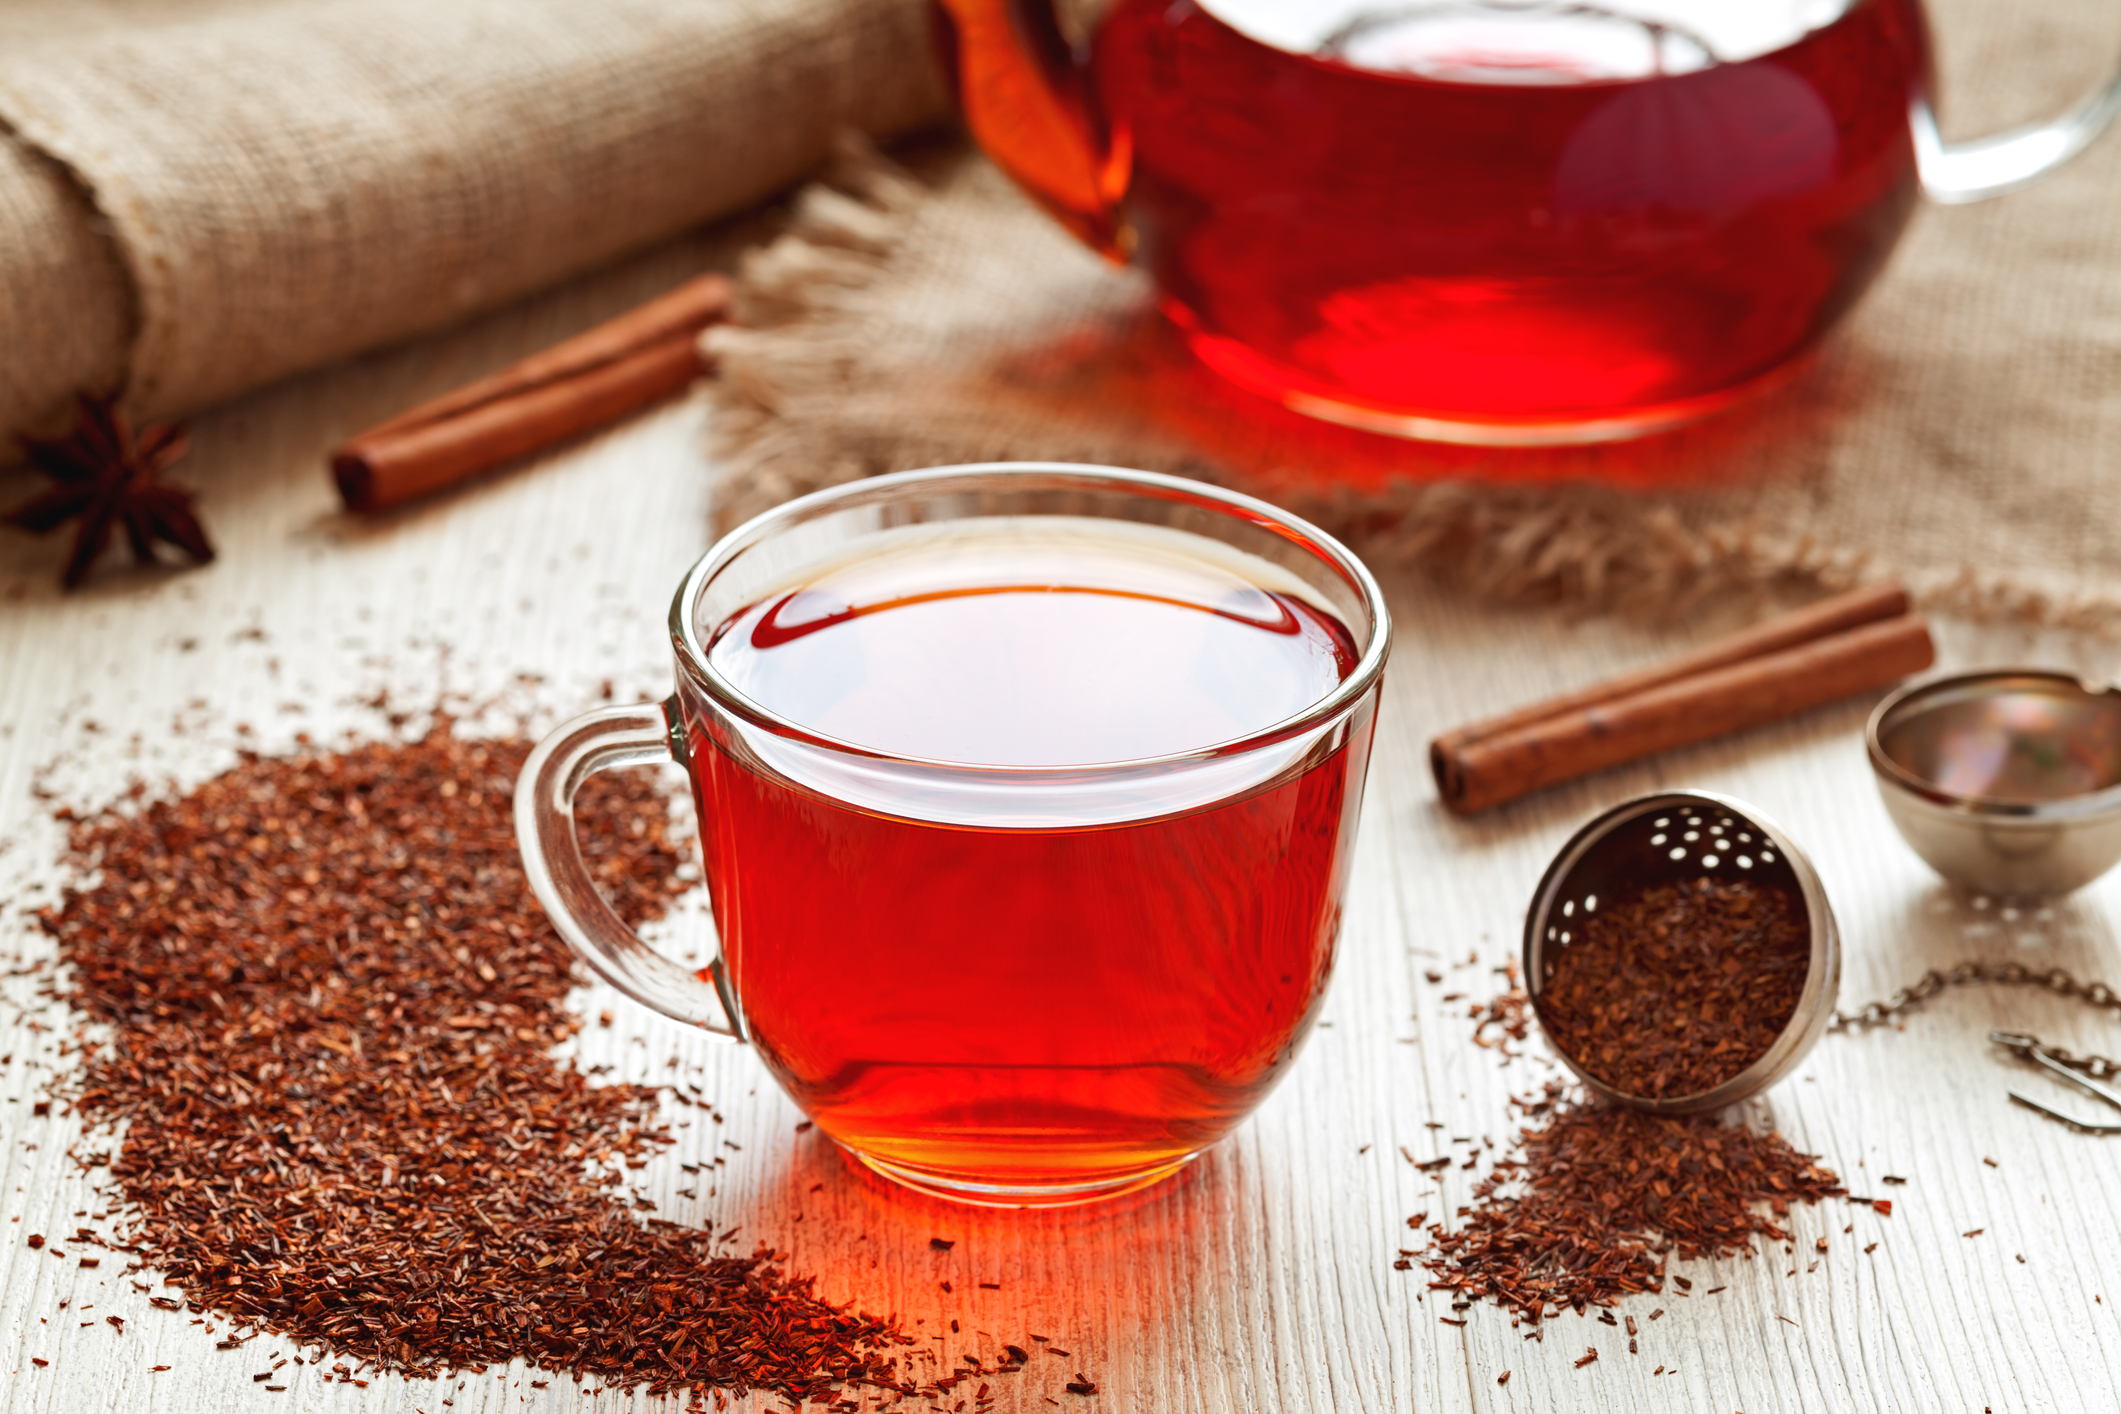 10 Surprising Facts About Rooibos Tea